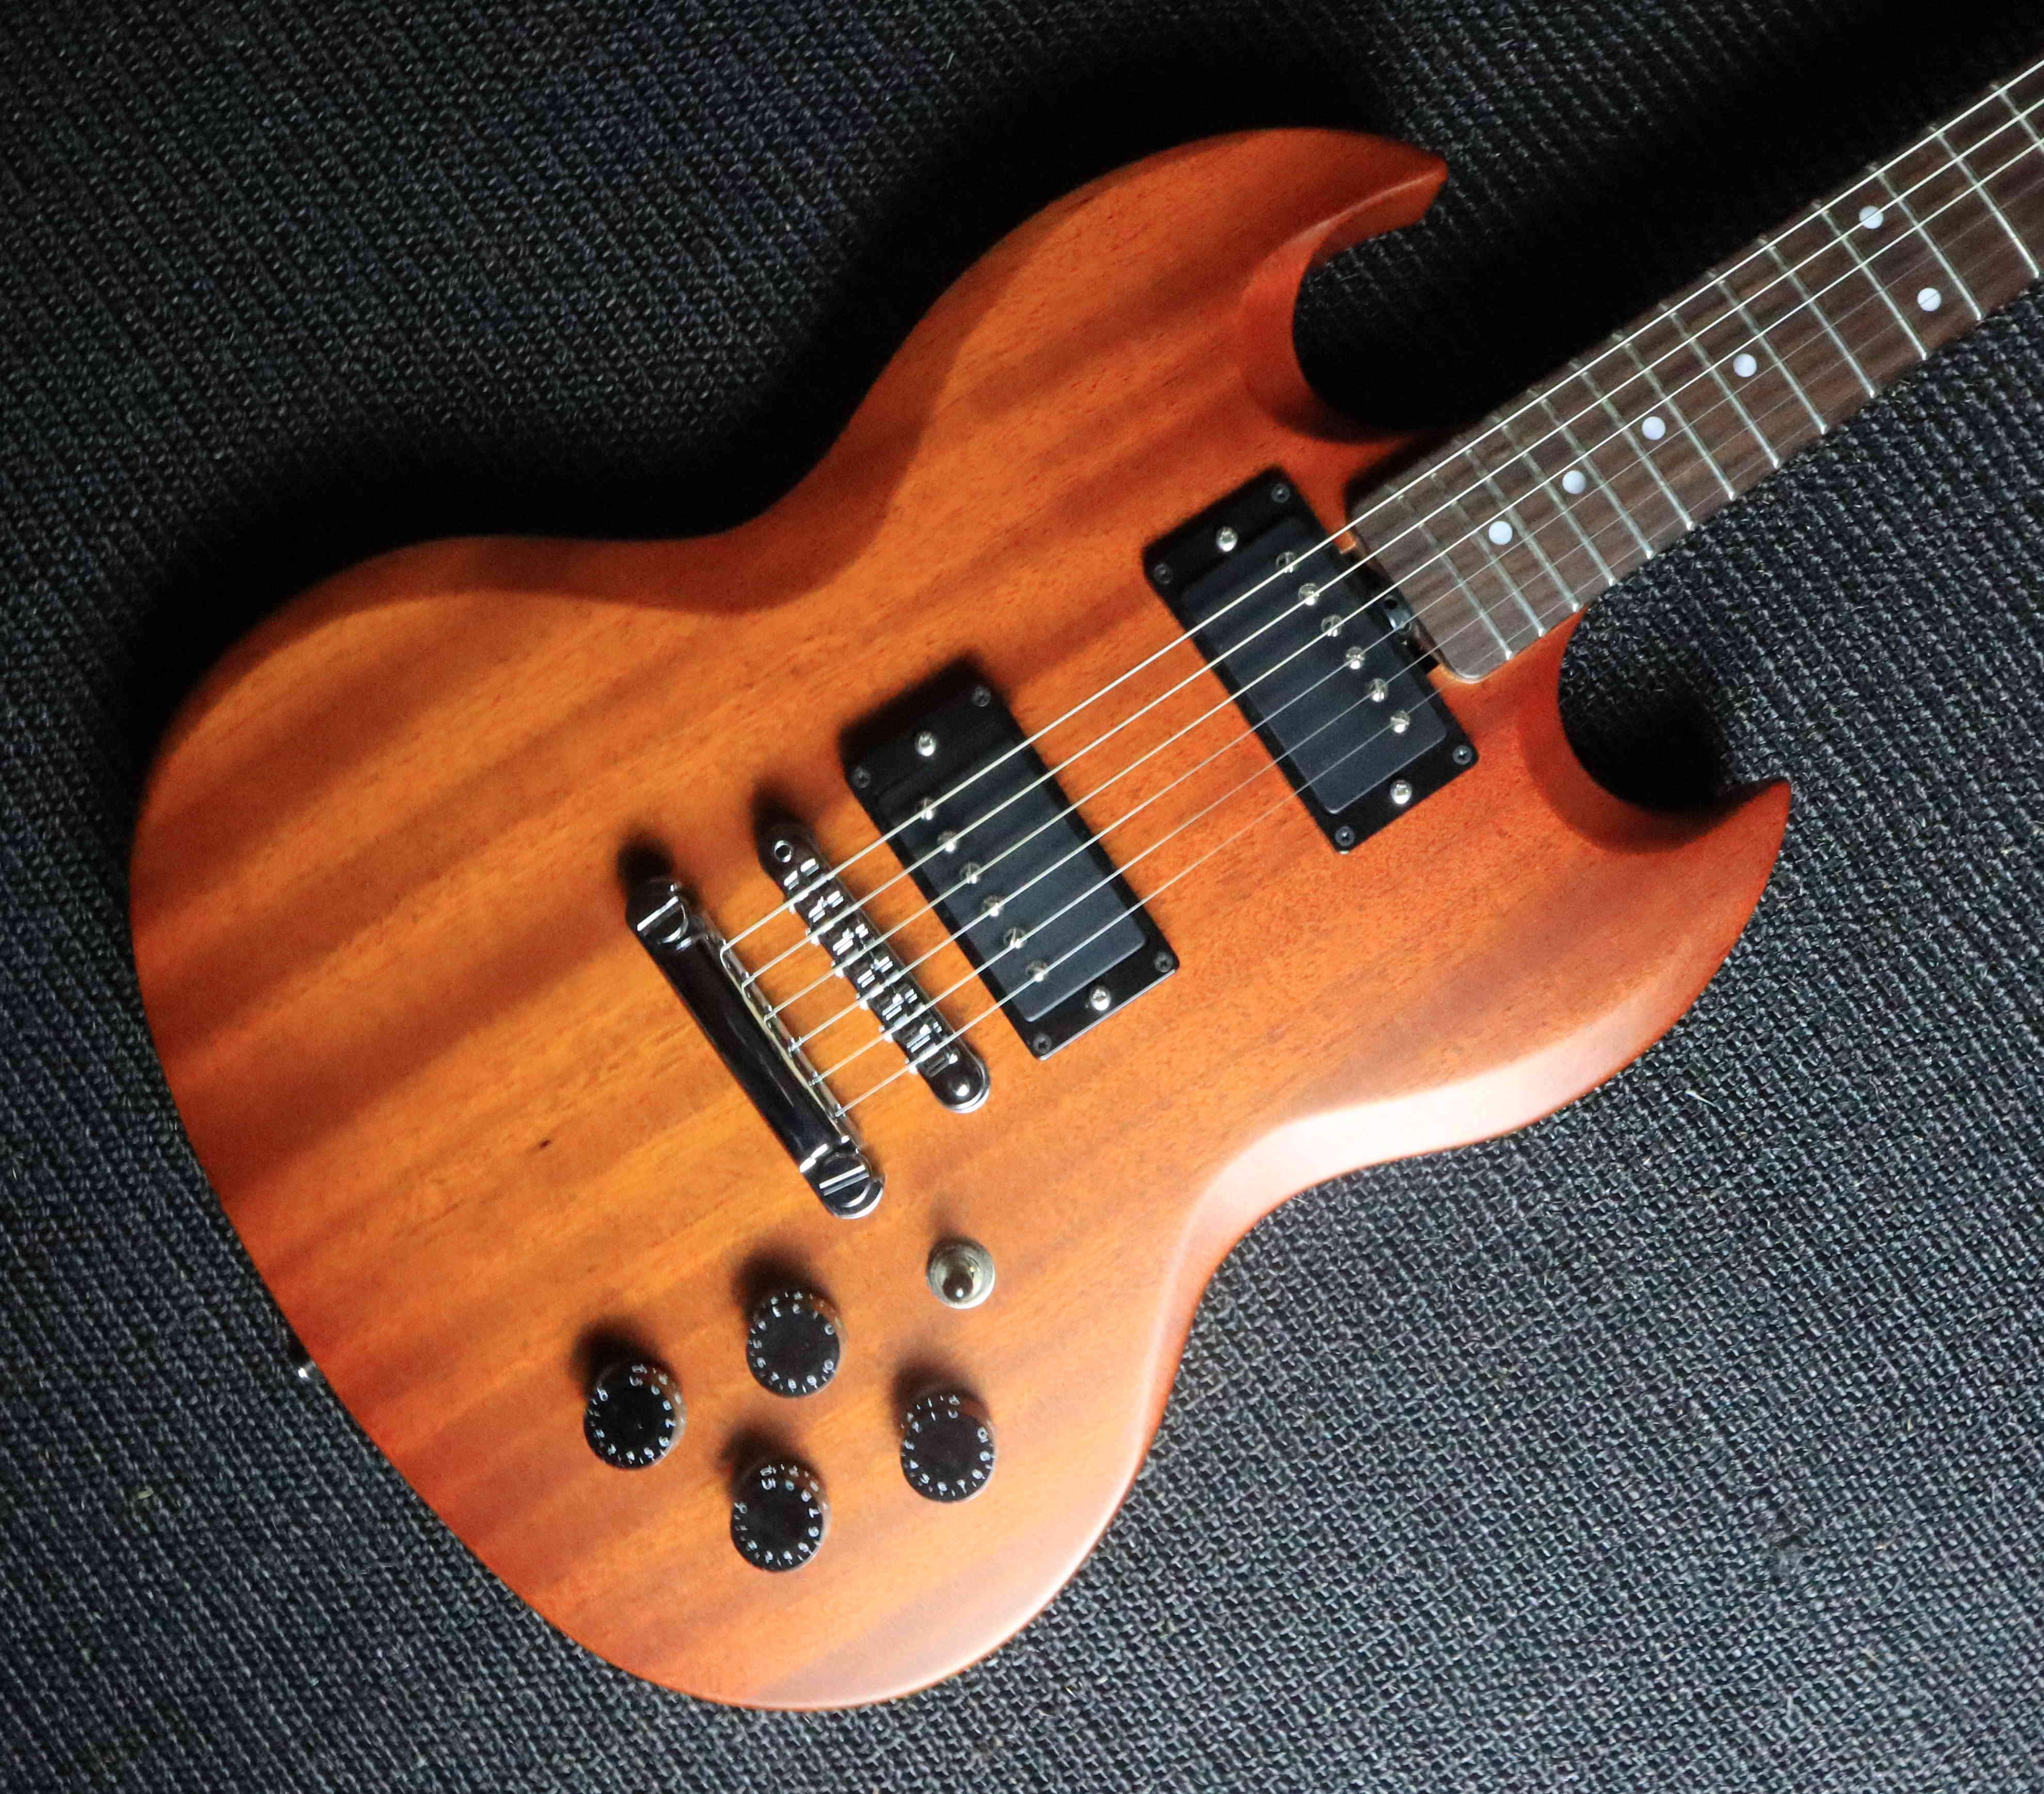 Gordon Smith SG2, Electric Guitar for sale at Richards Guitars.